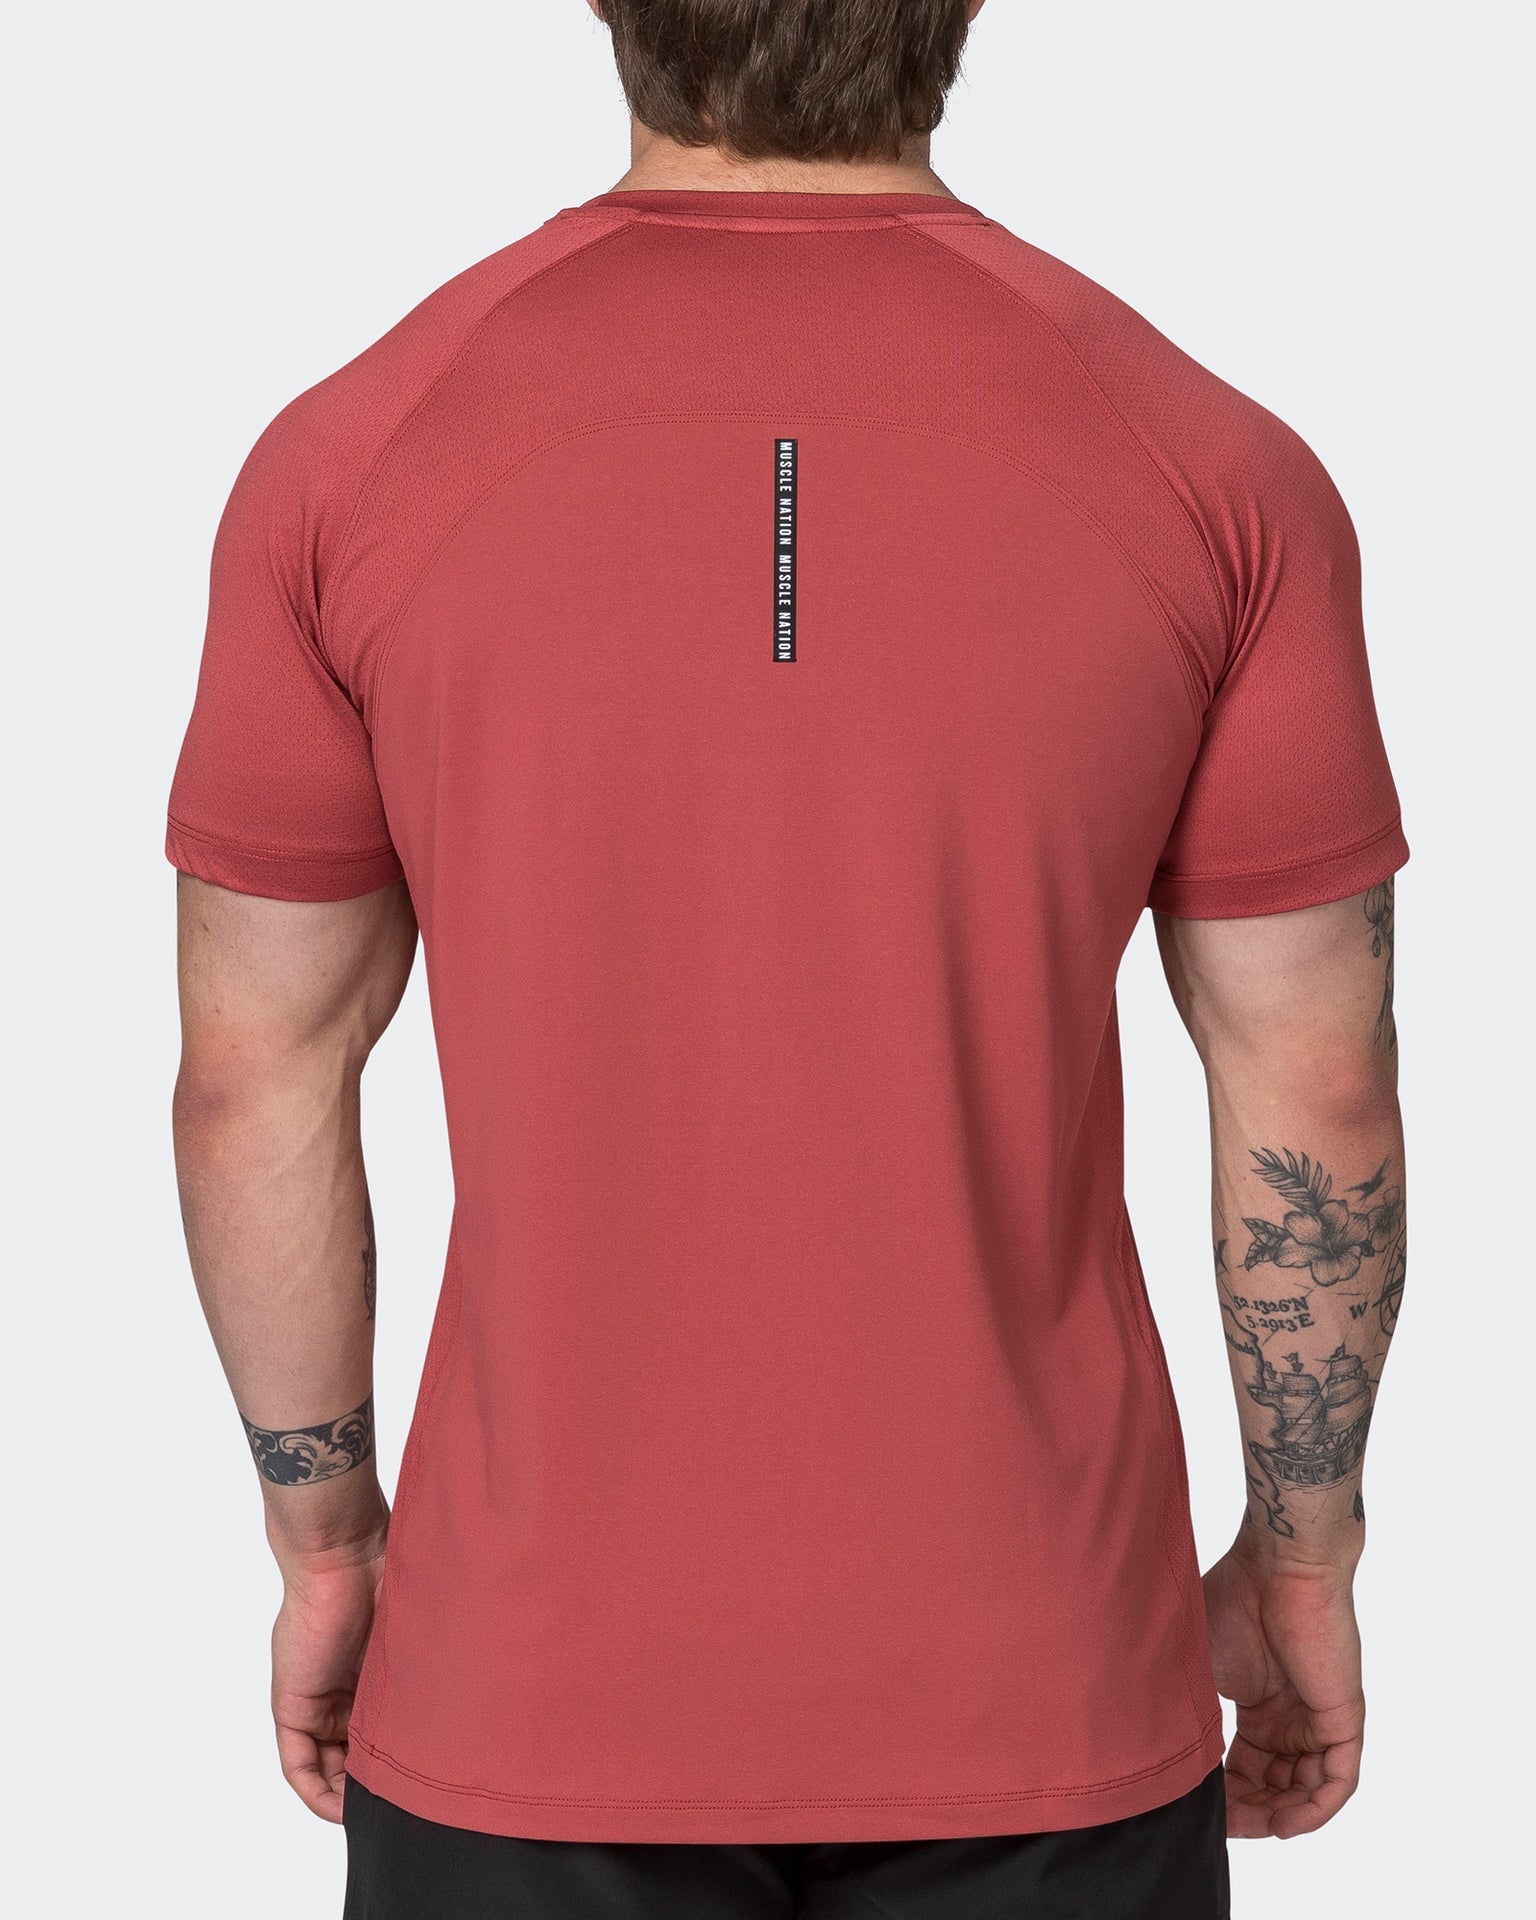 Muscle Nation T-Shirts Ventilation Tee - Dusty Red